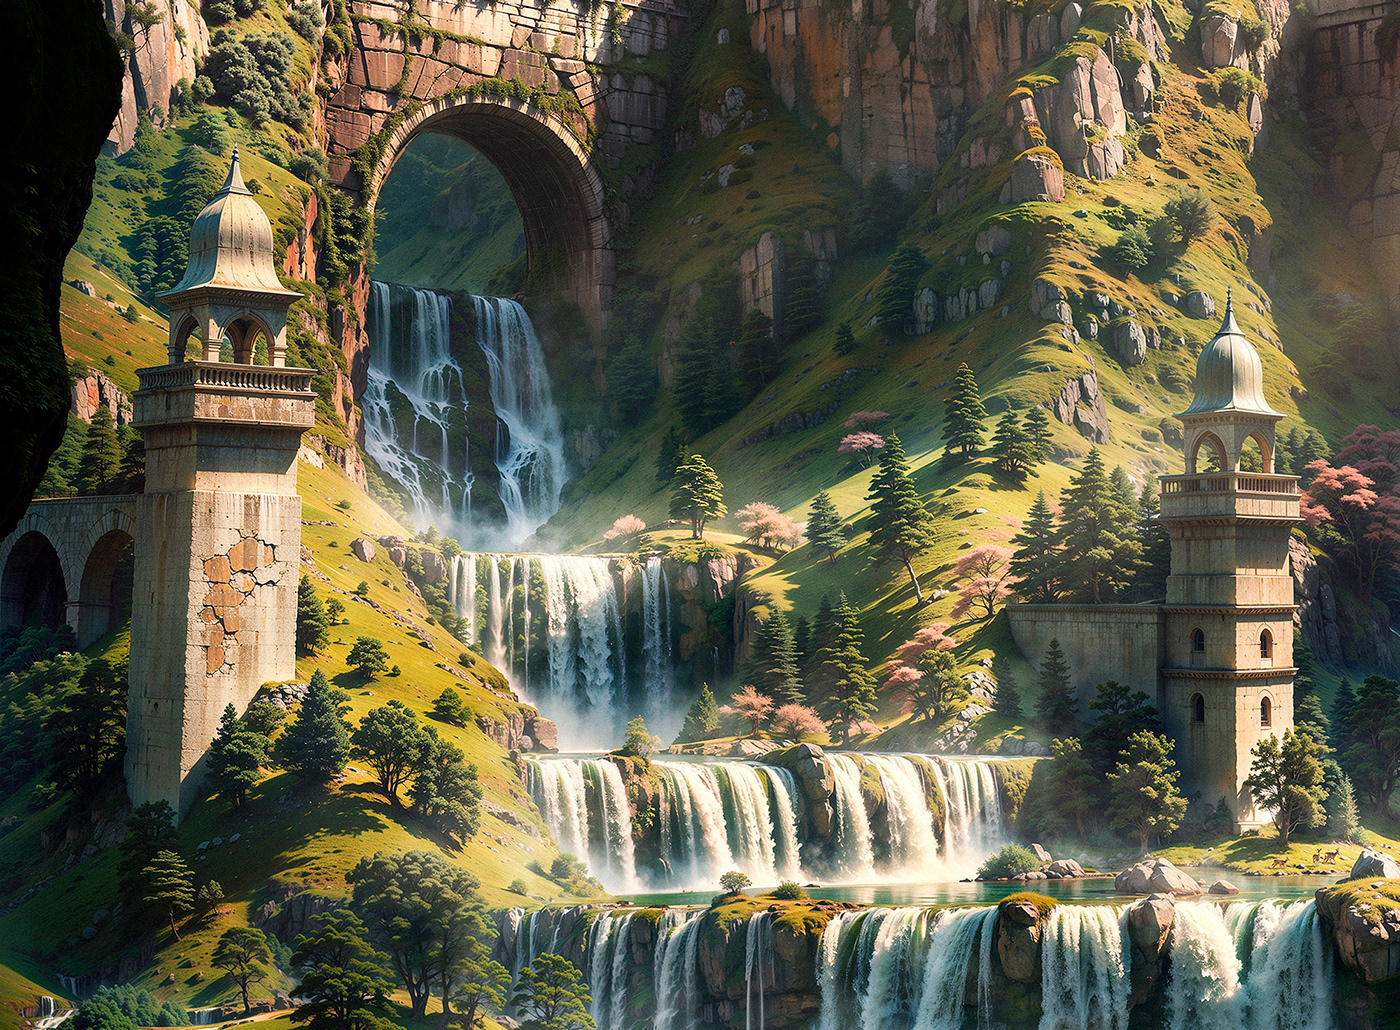 Lord of the rings the Hobbit gandalf wizard fantasy ruins abandoned Waterfalls Tolkien Ancient City